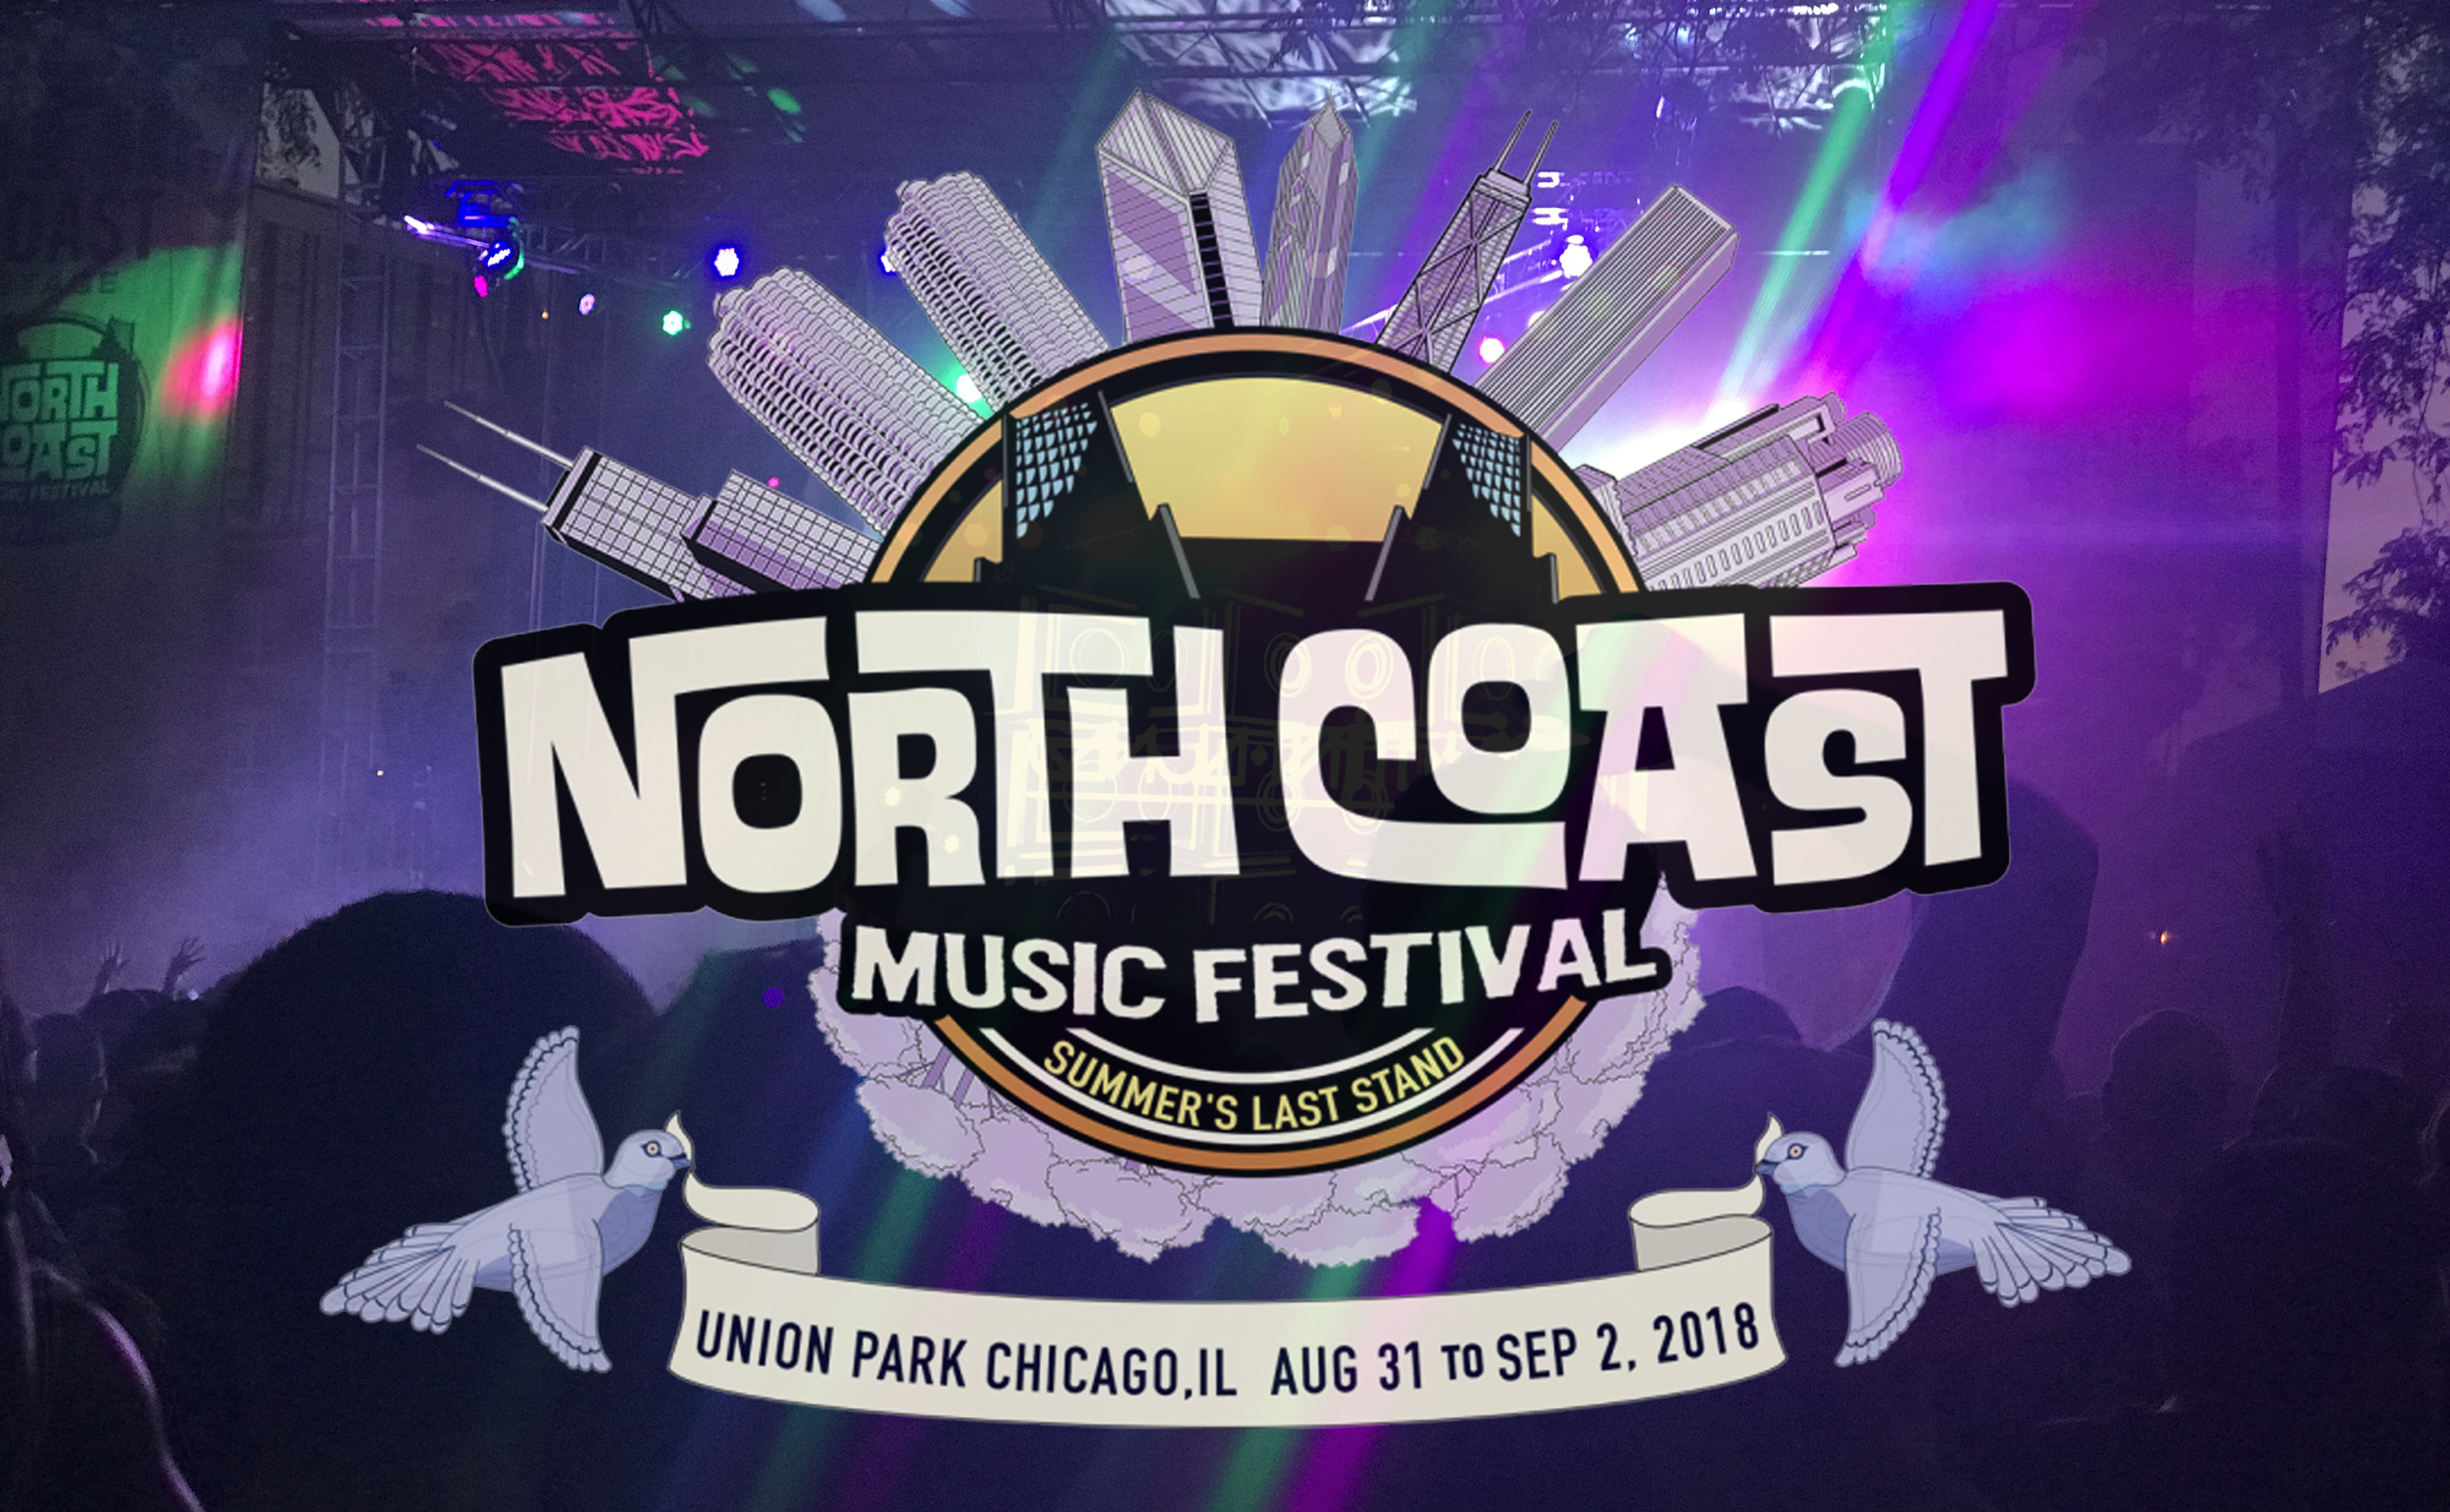 NORTH COAS MUSIC FESTIVAL LINEUP AND SET TIMES